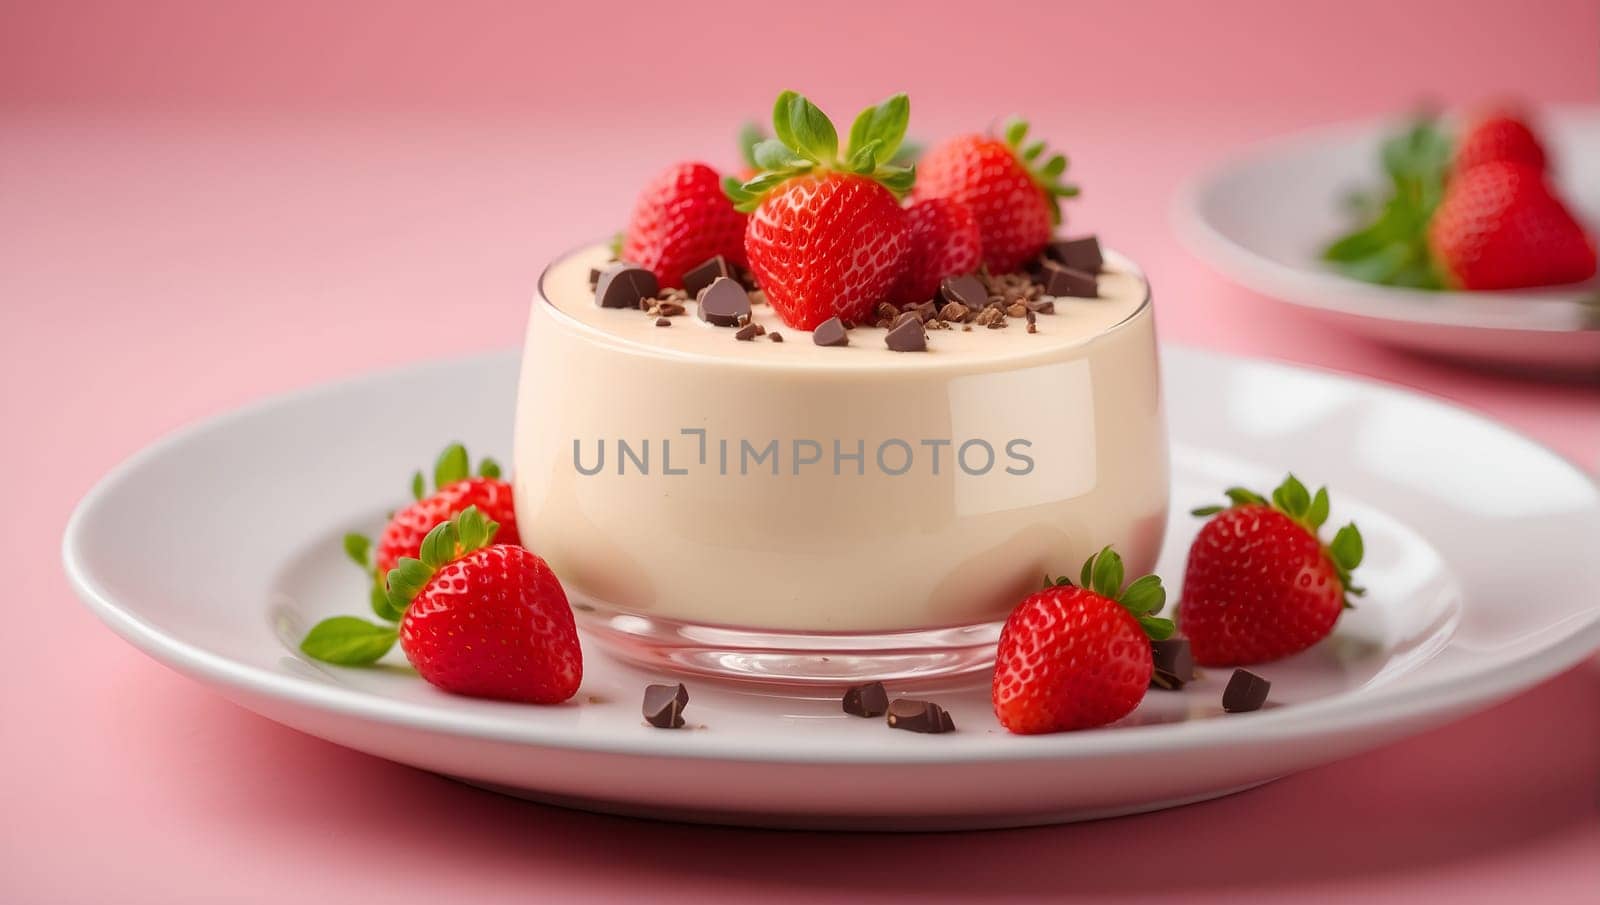 Panna cotta with strawberries on a pastel pink background by Севостьянов